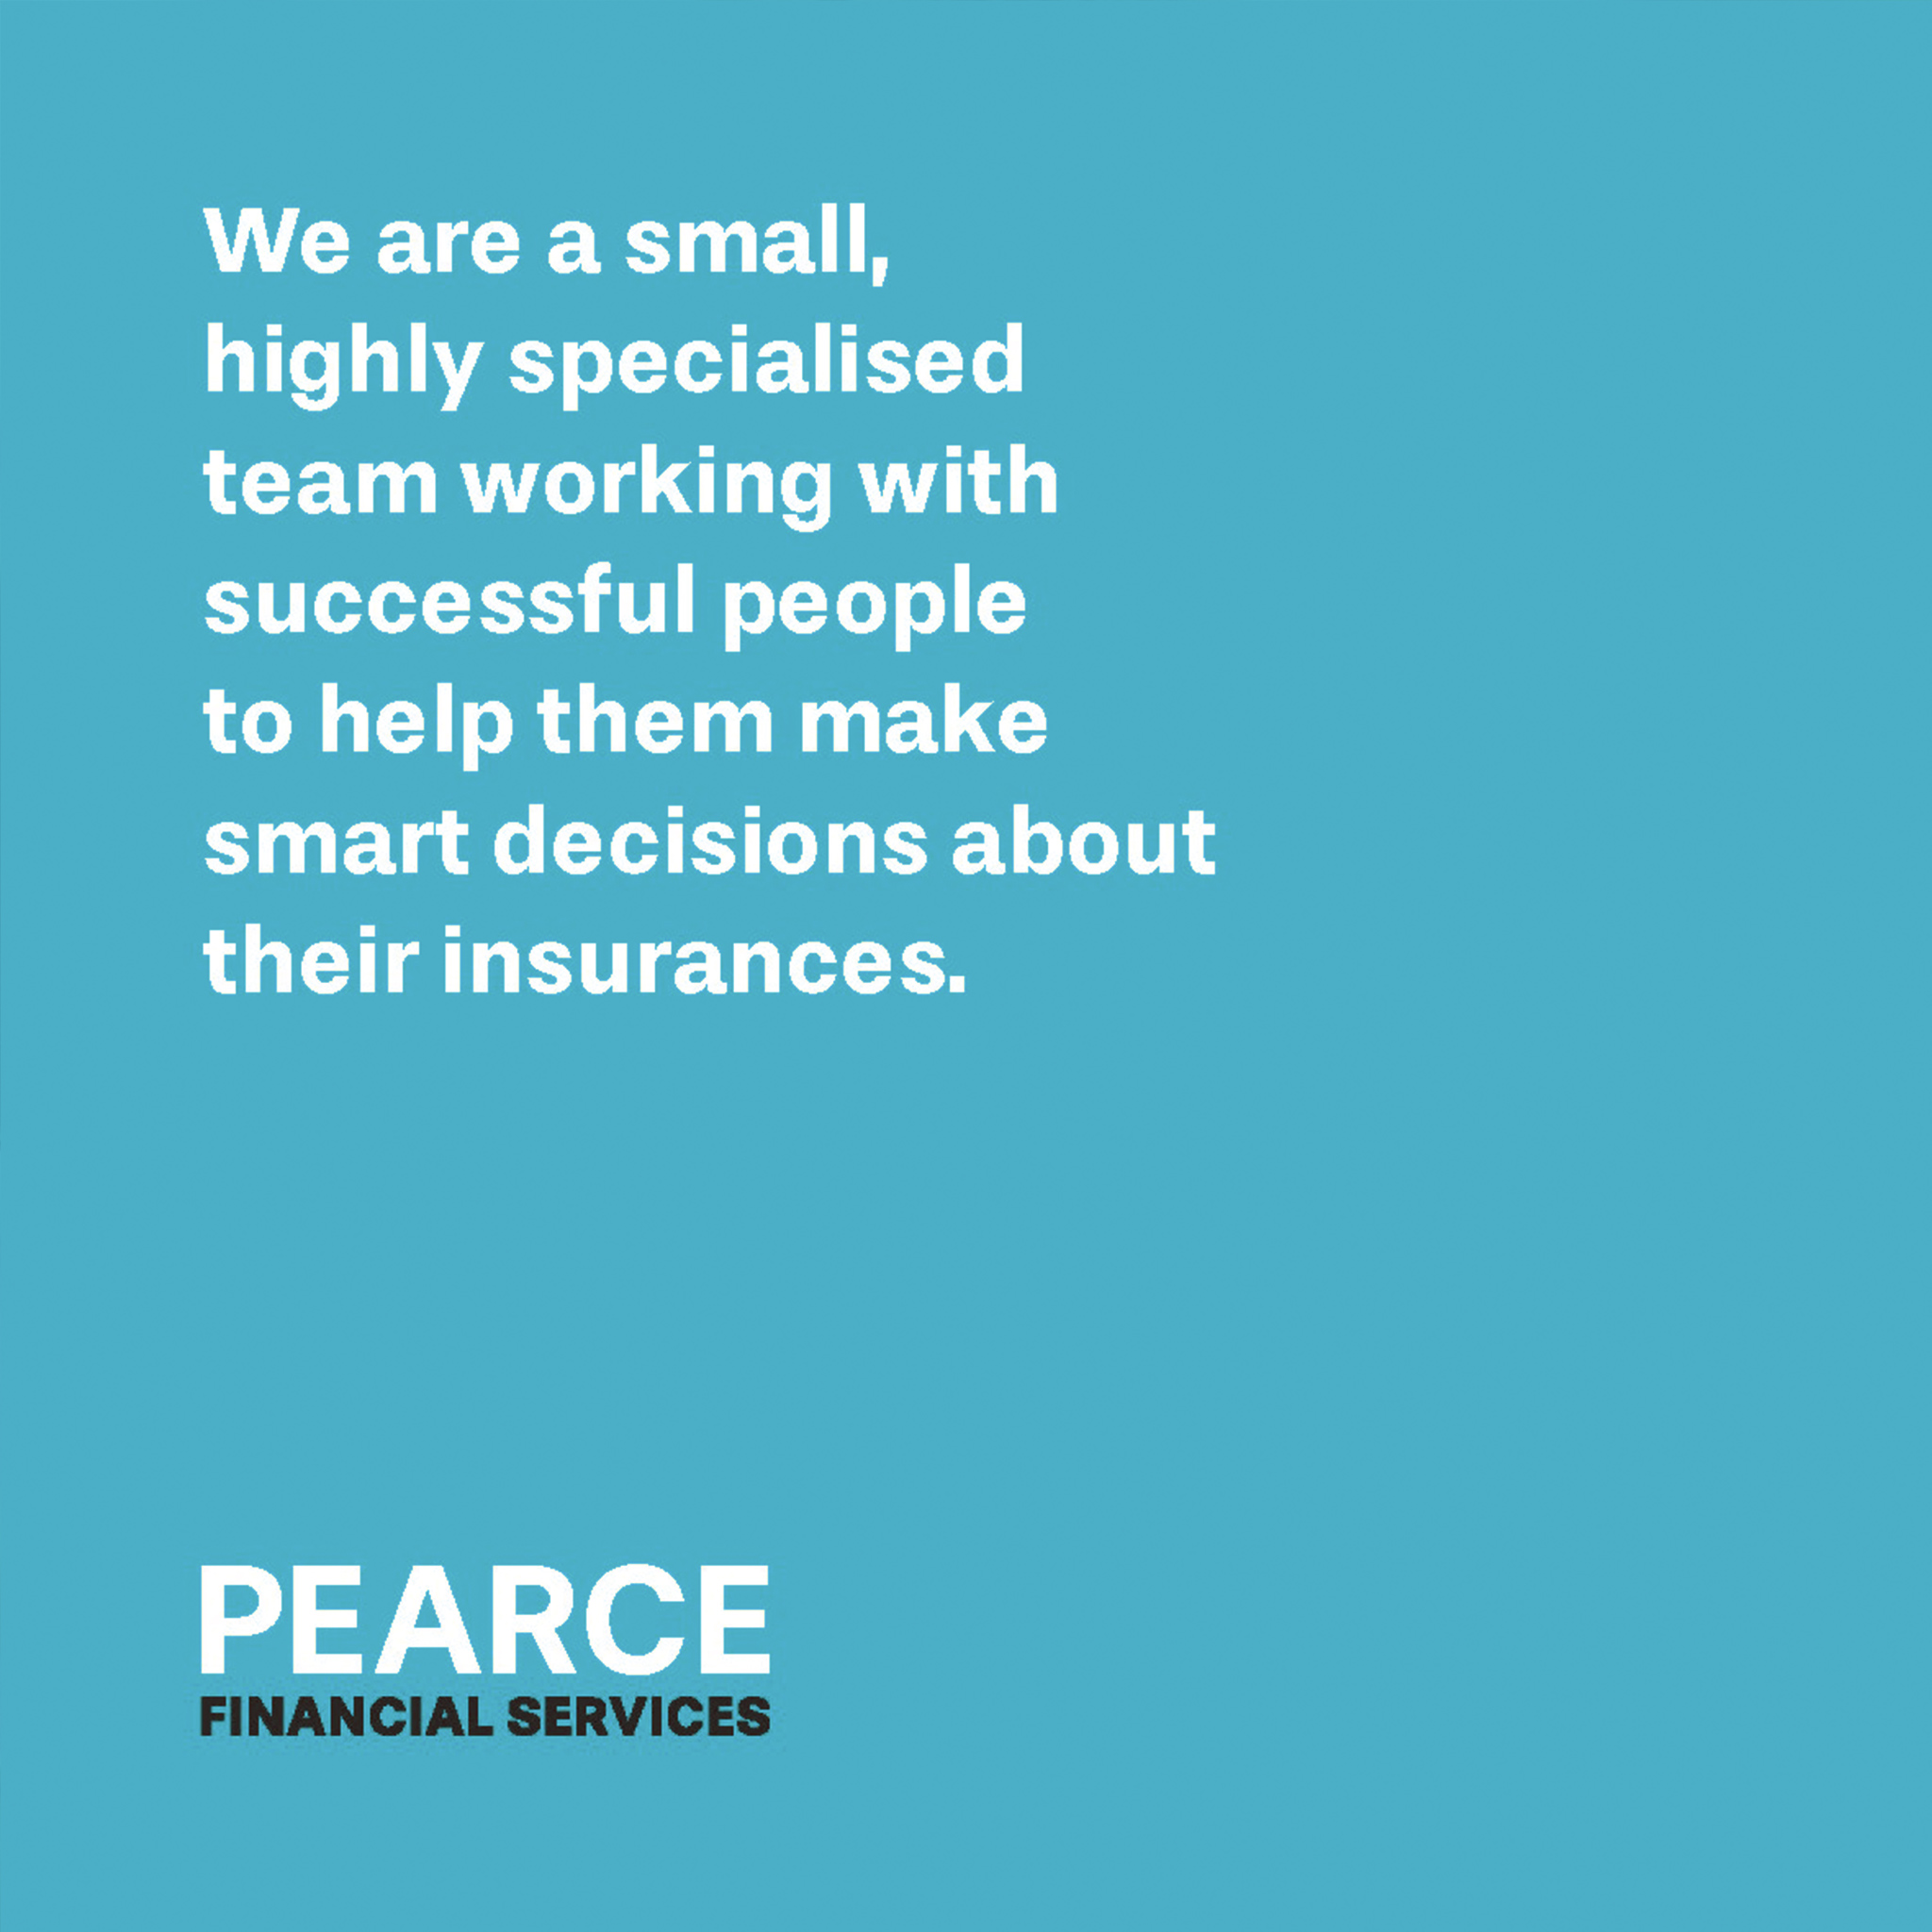 Pearce Financial Services